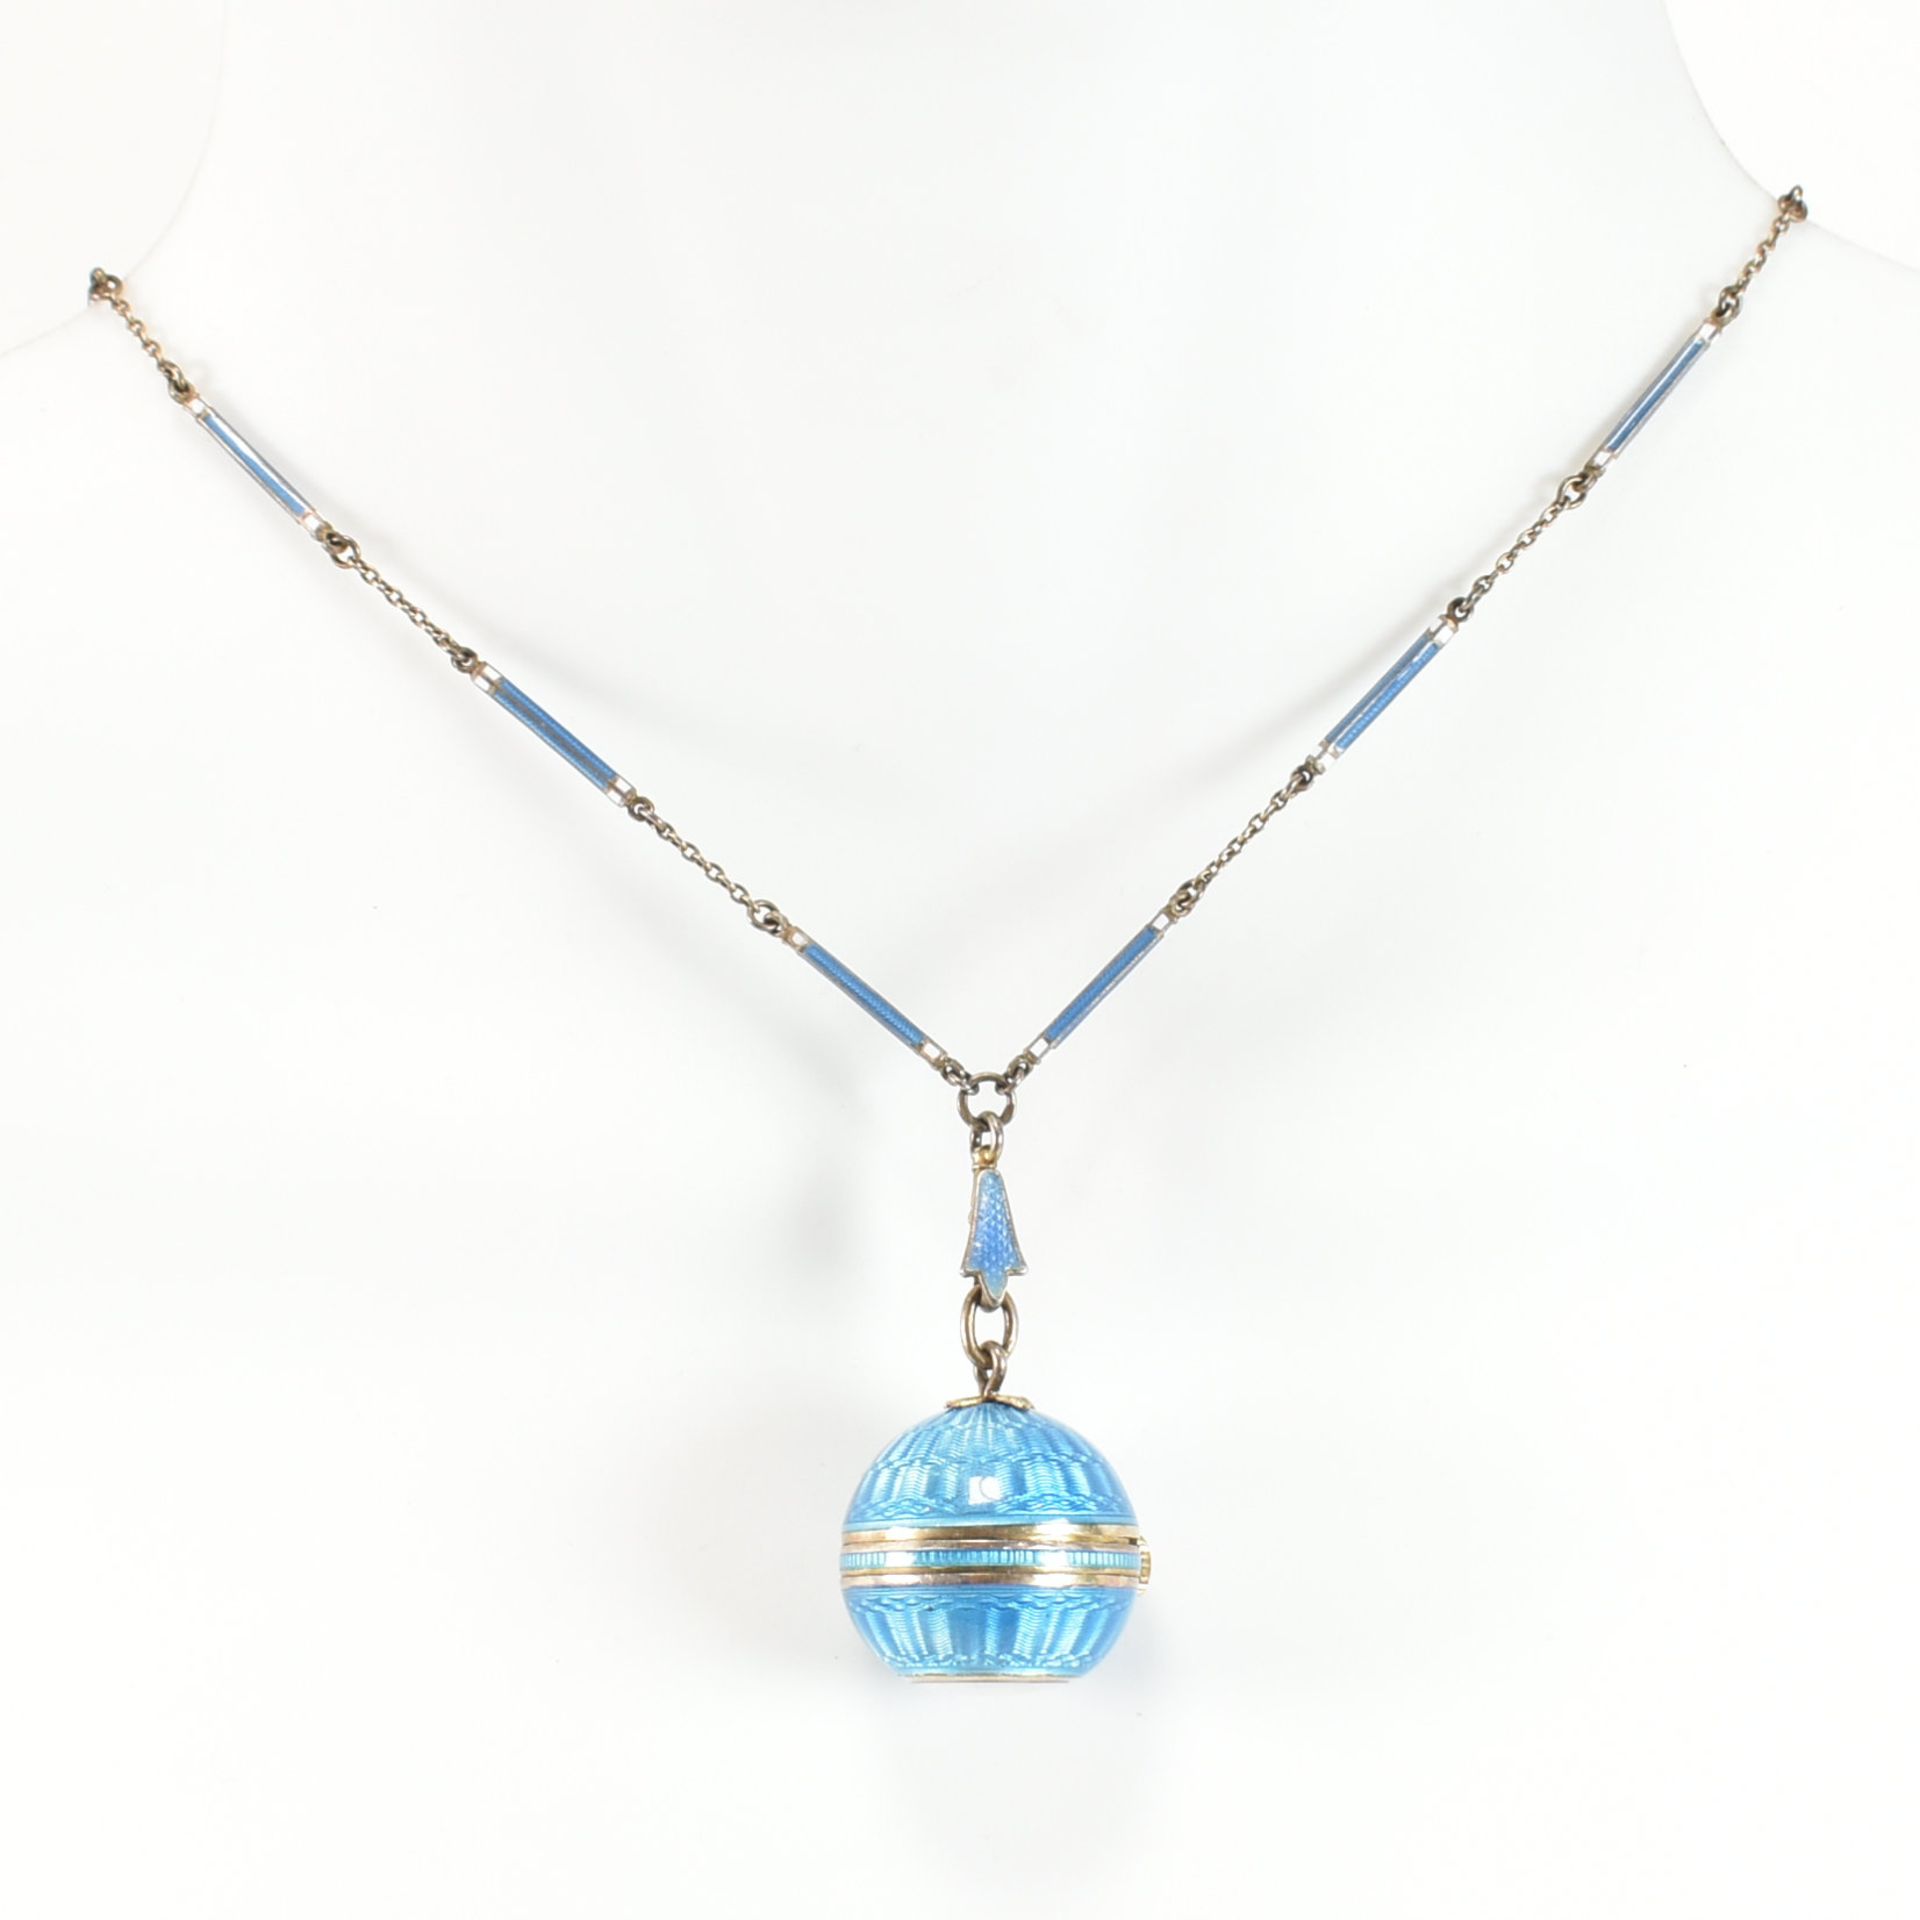 EARLY 20TH CENTURY SWISS SILVER ENAMEL BALL WATCH & CHAIN - Image 12 of 13